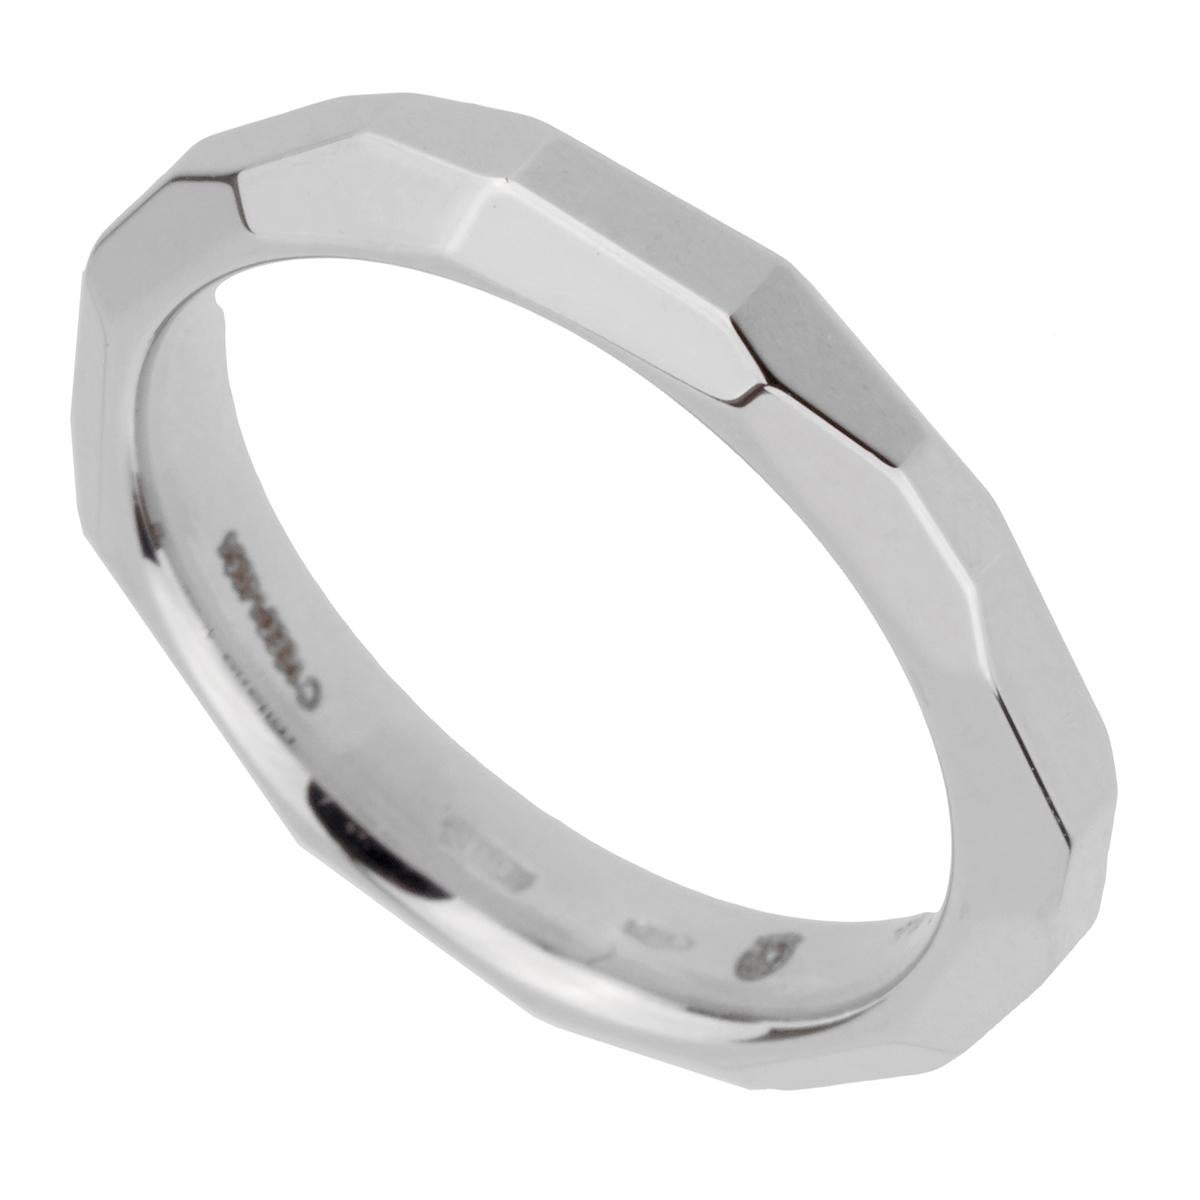 A chic white gold Pomellato band style ring crafted in 18k white gold, The ring measures a size 6.75 and can be resized.

Sku: 2390